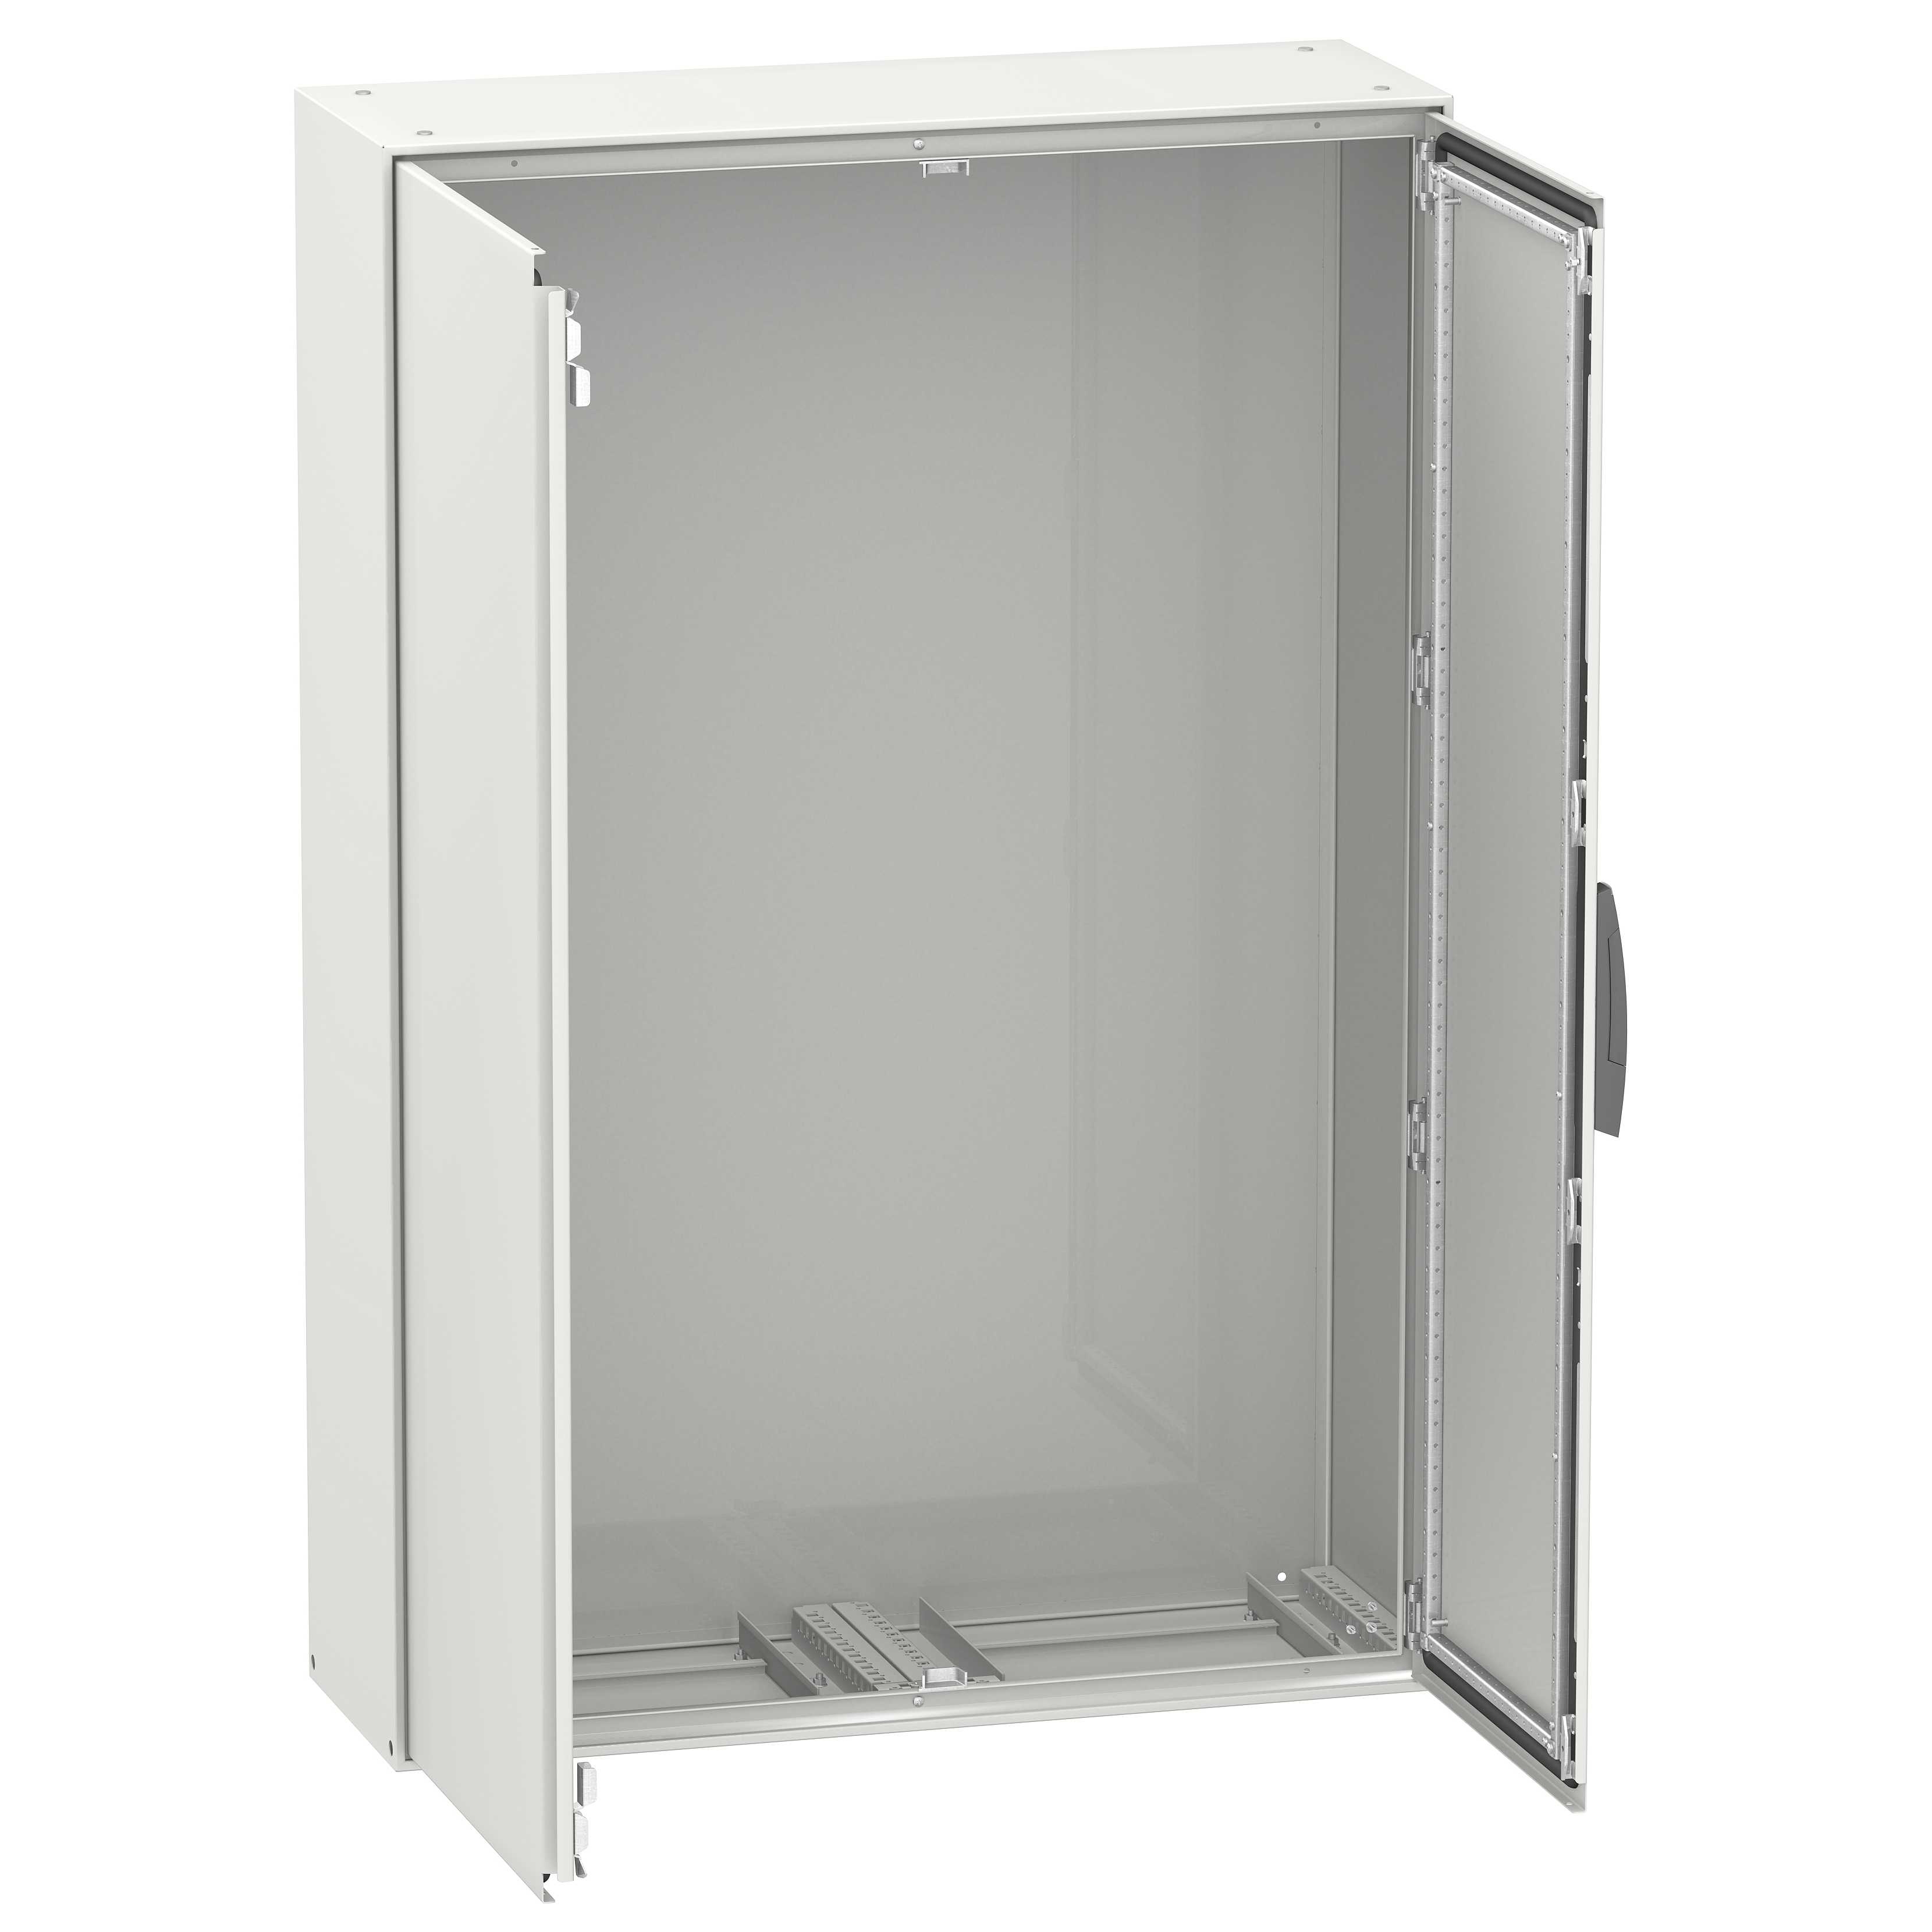 Spacial SM compact enclosure with mounting plate - 2000x1200x400 mm